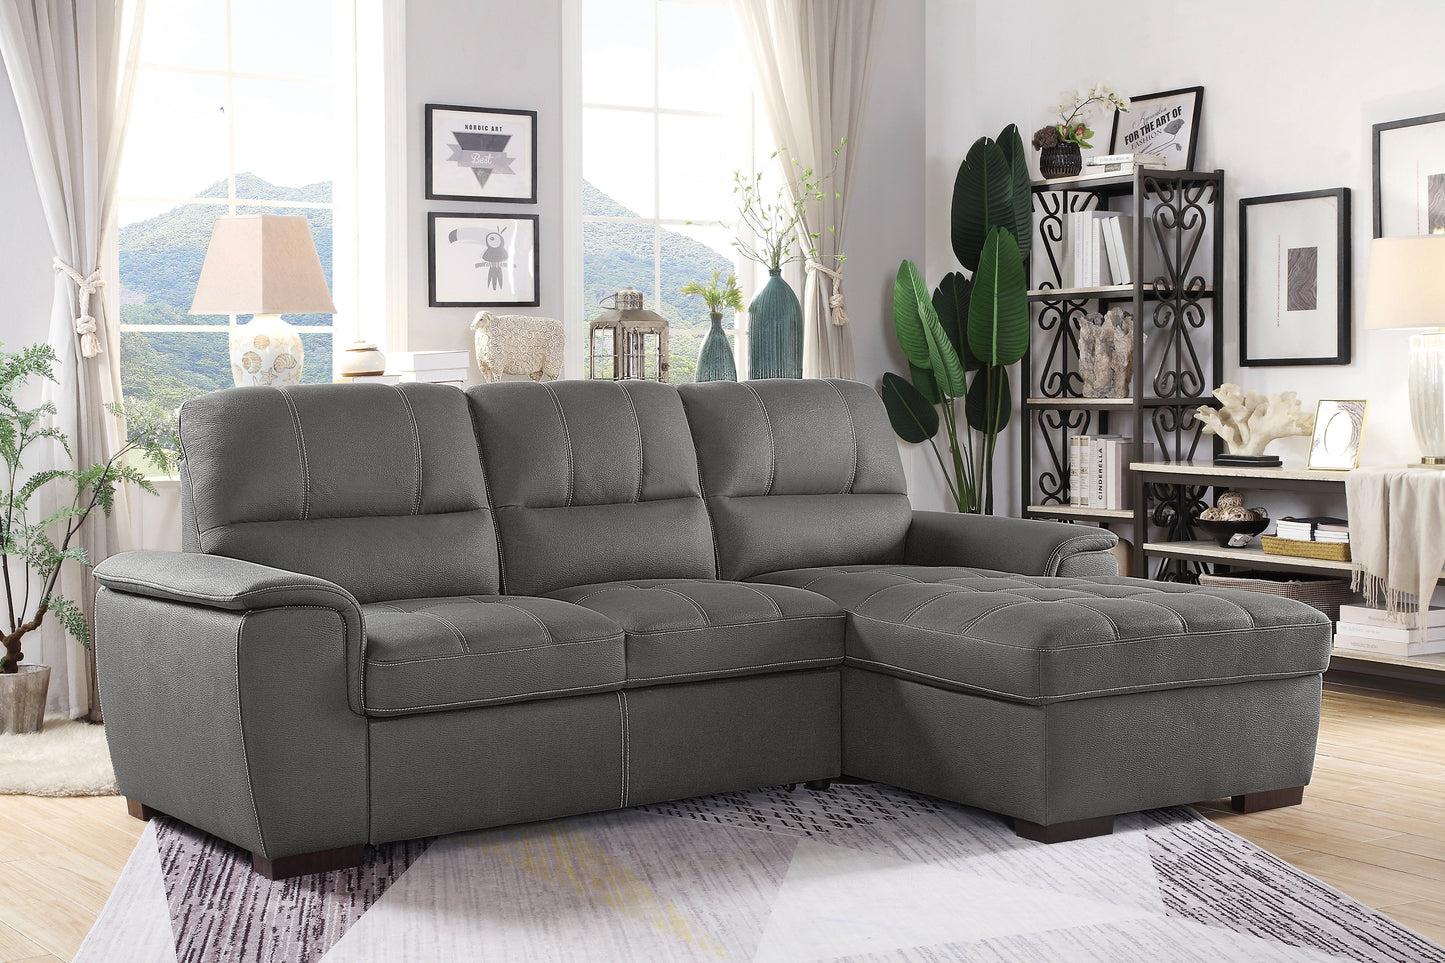 Andes Sectional W/Sleeper & Storage RAF ONLY, GREY